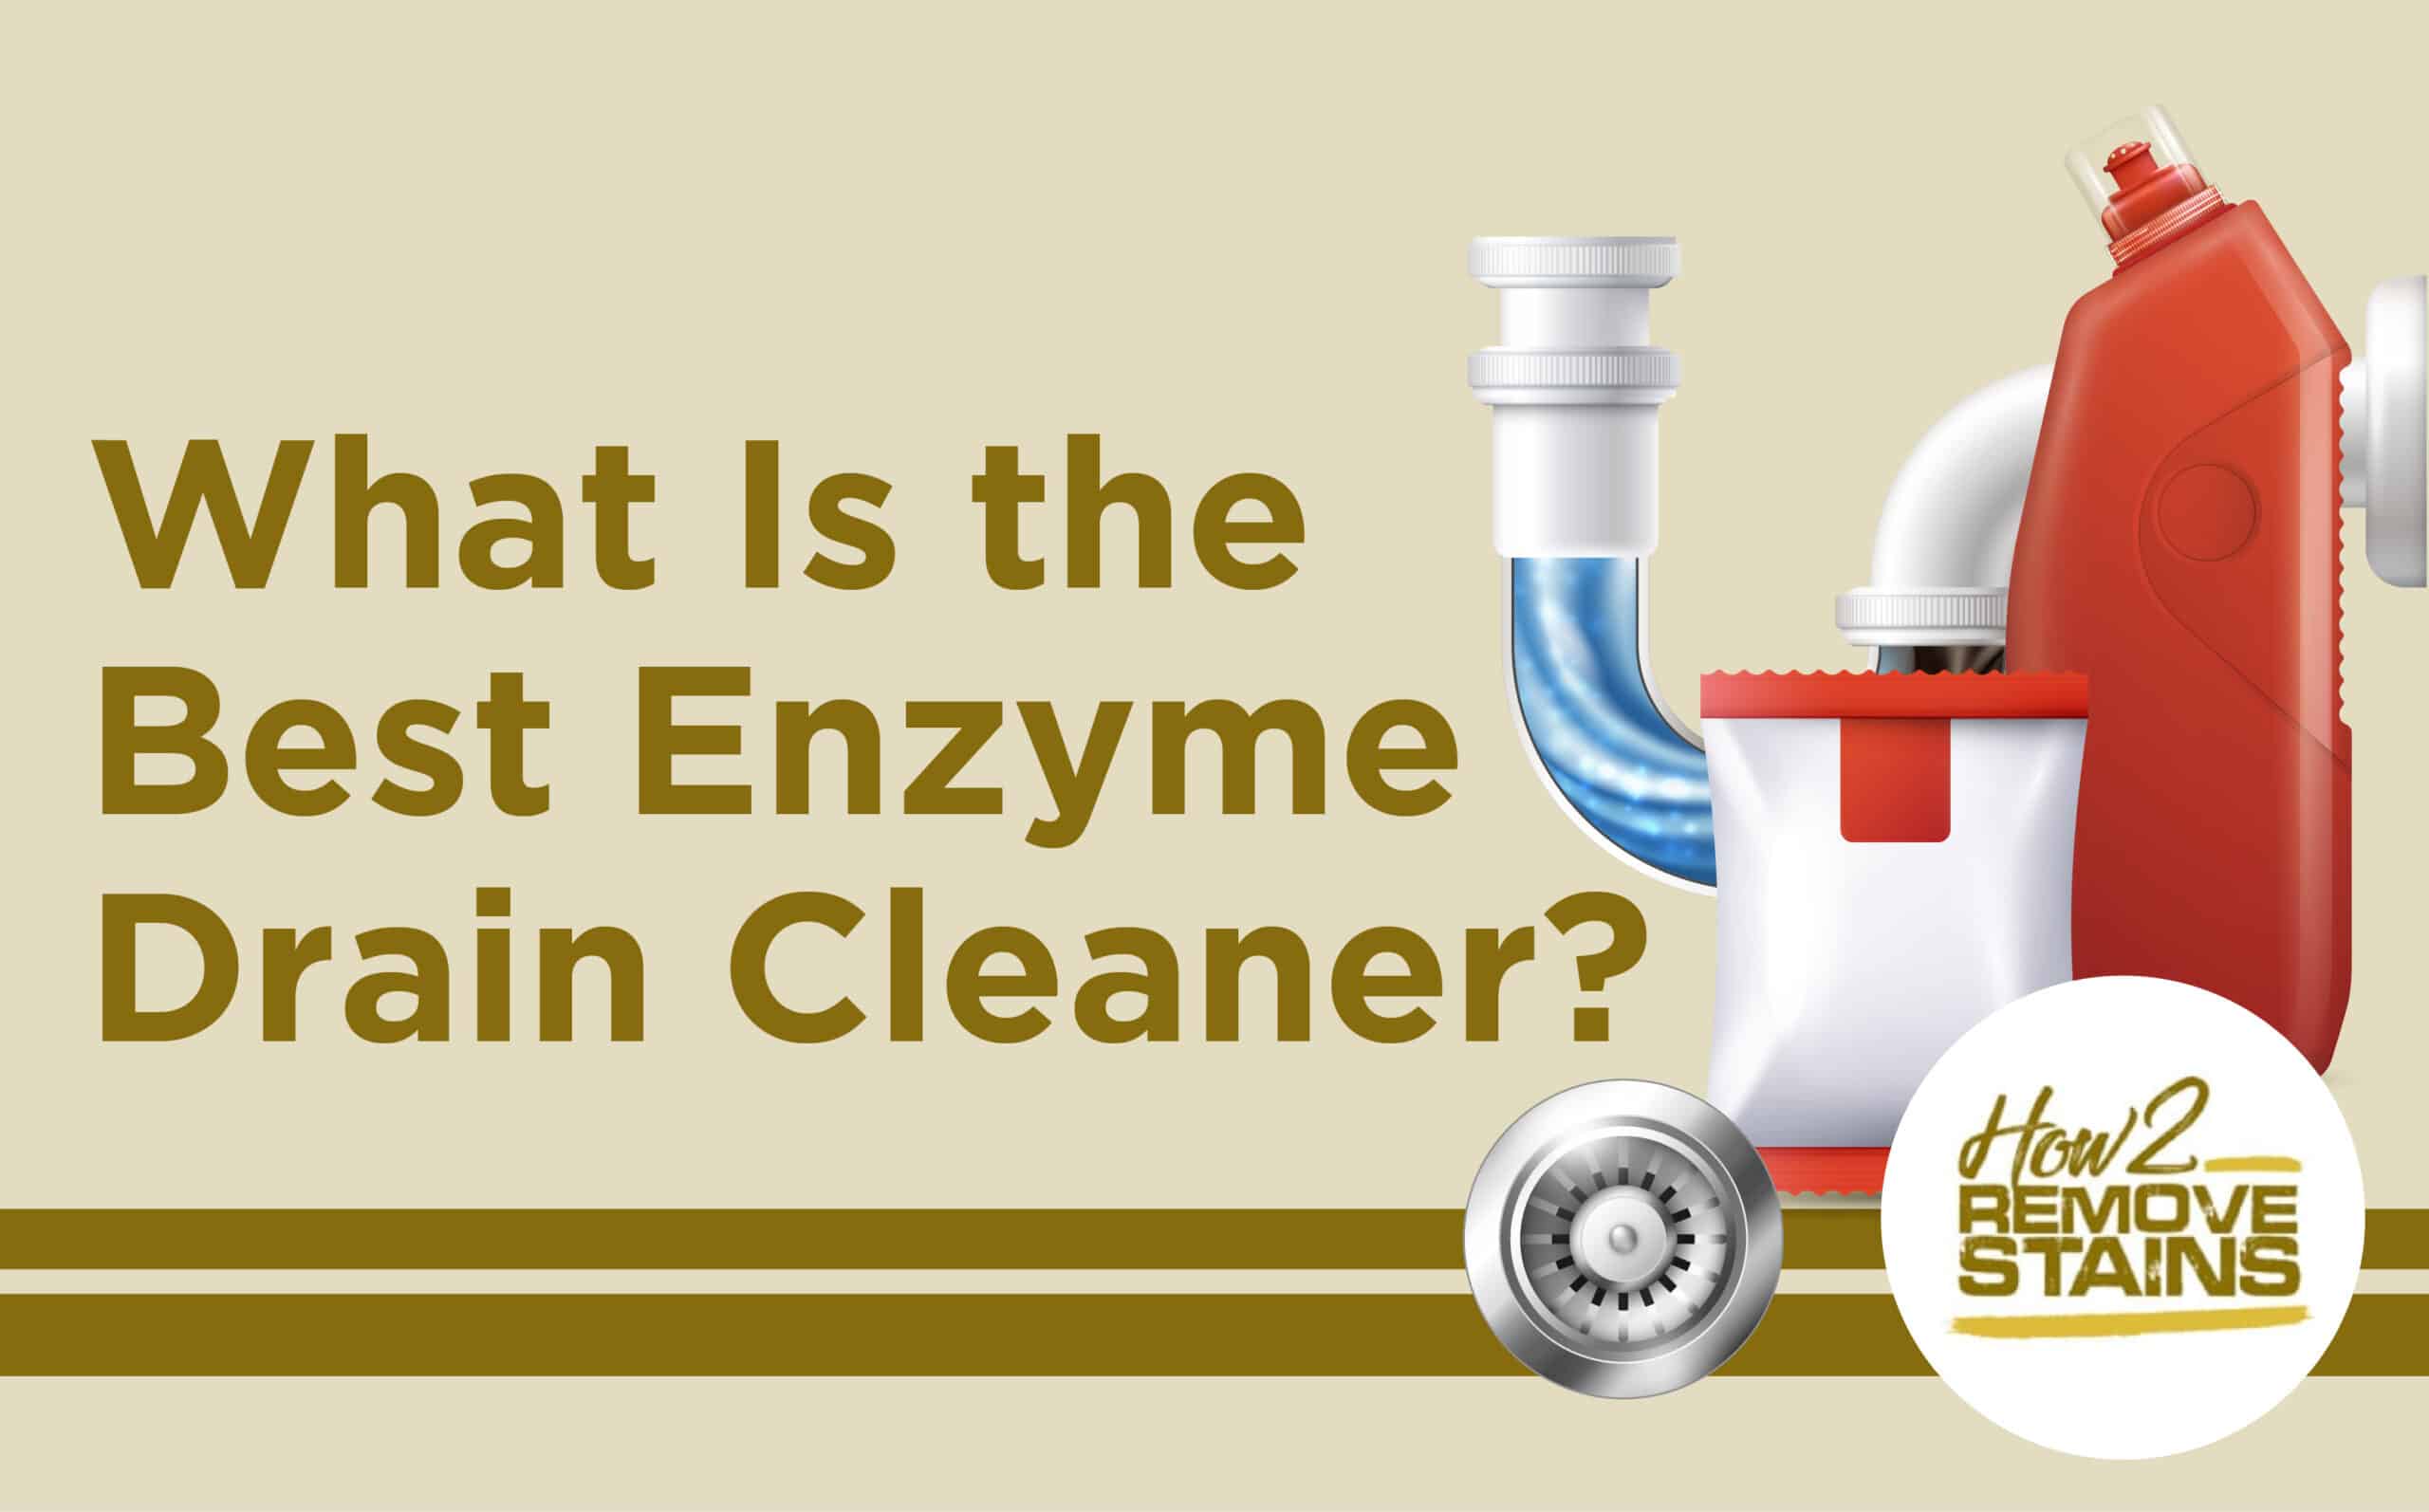 What Is the Best Enzyme Drain Cleaner